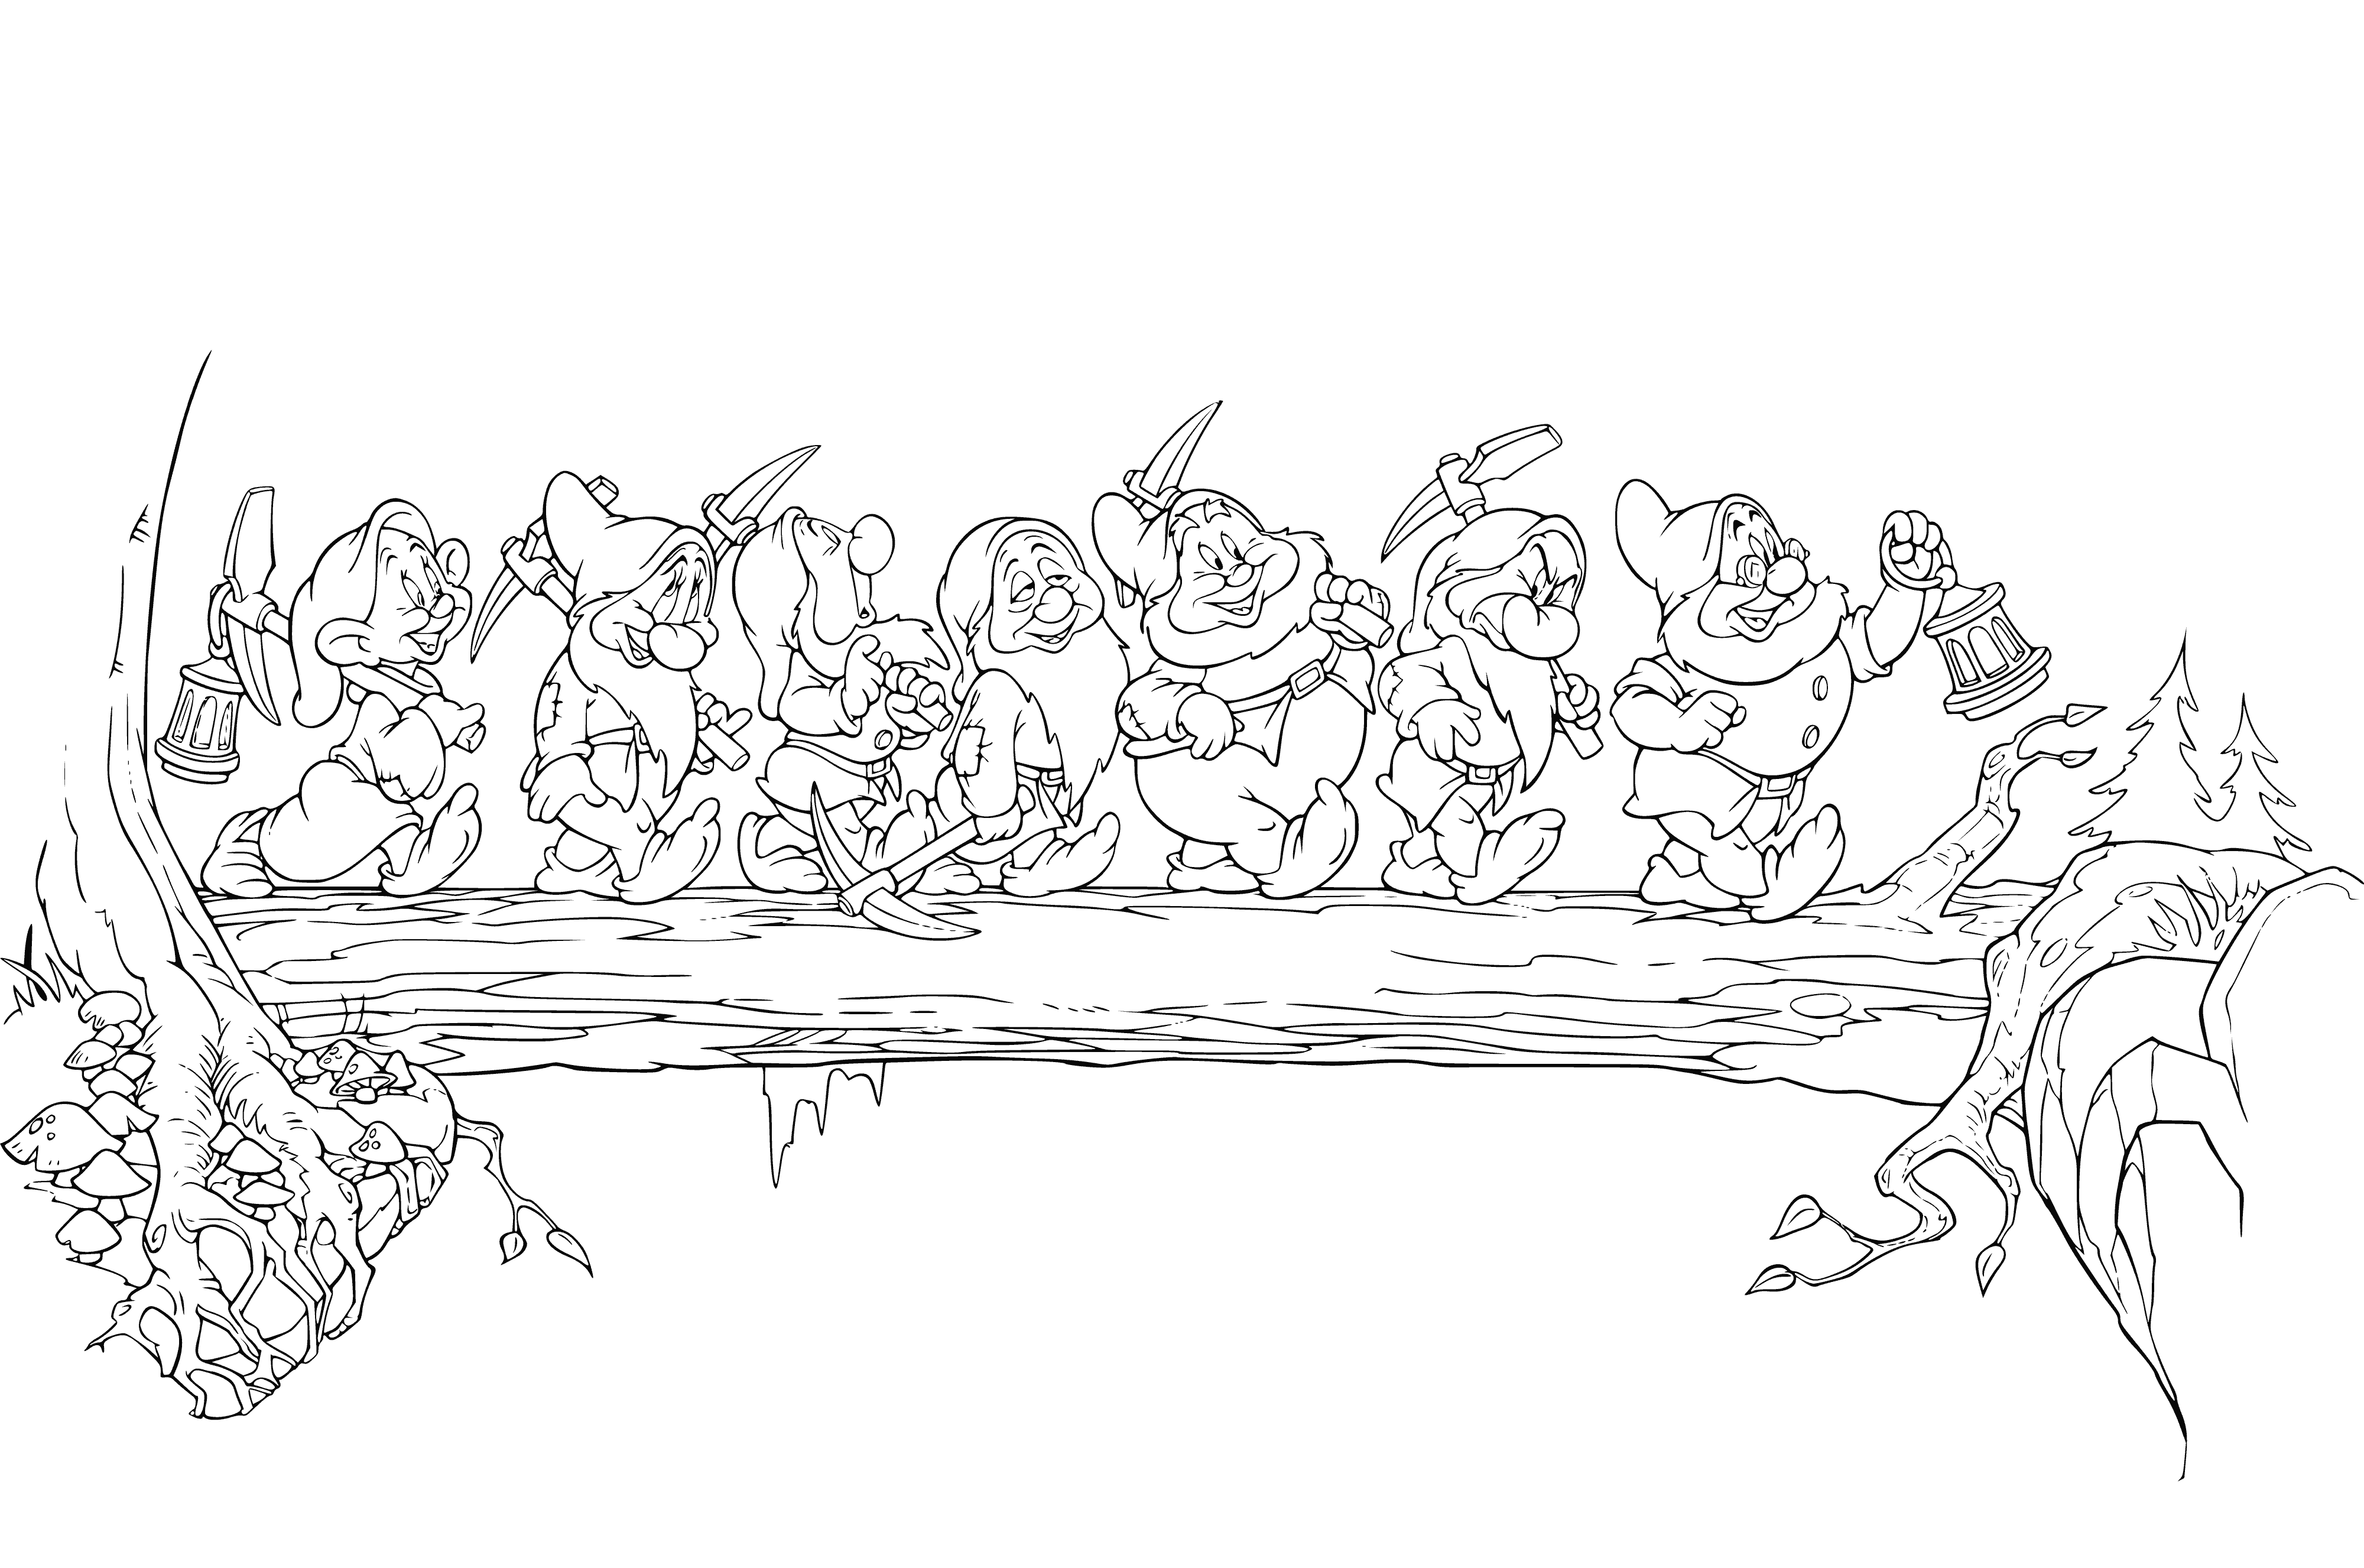 coloring page: 7 people in a line wearing leaf/dirt clothes, looking at something off to side - all with big noses!